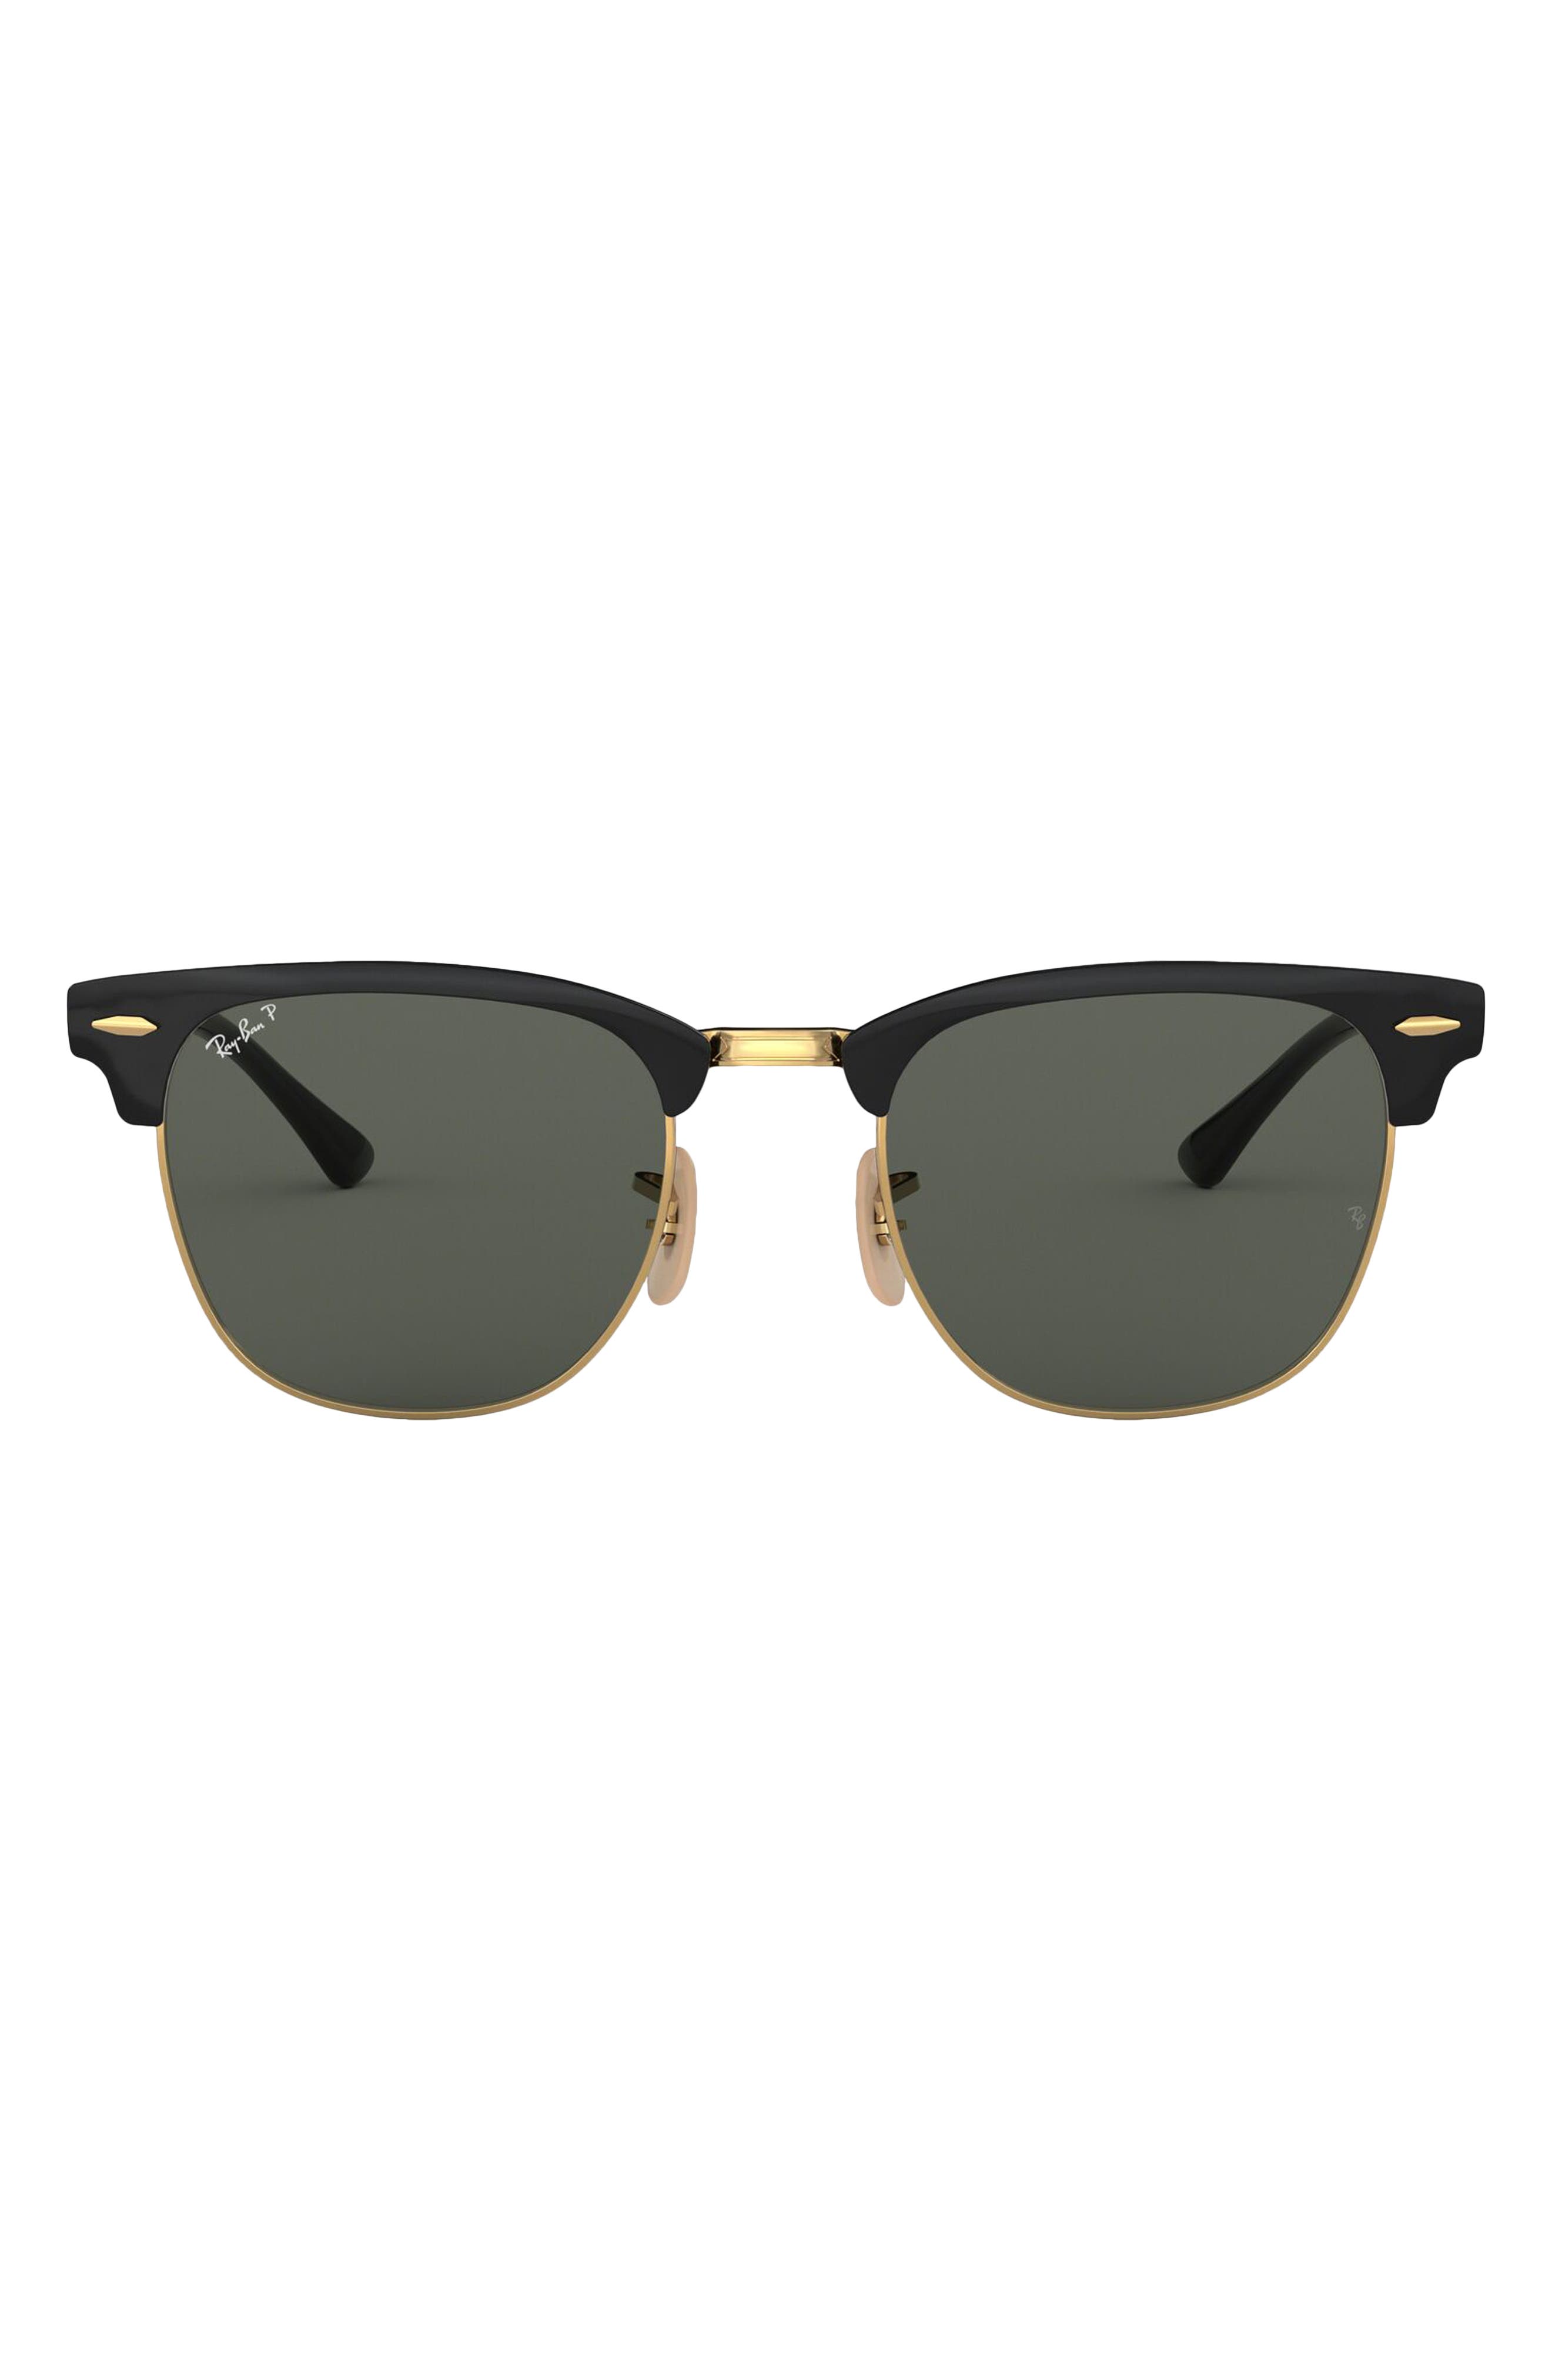 ray ban sunglasses for women with price